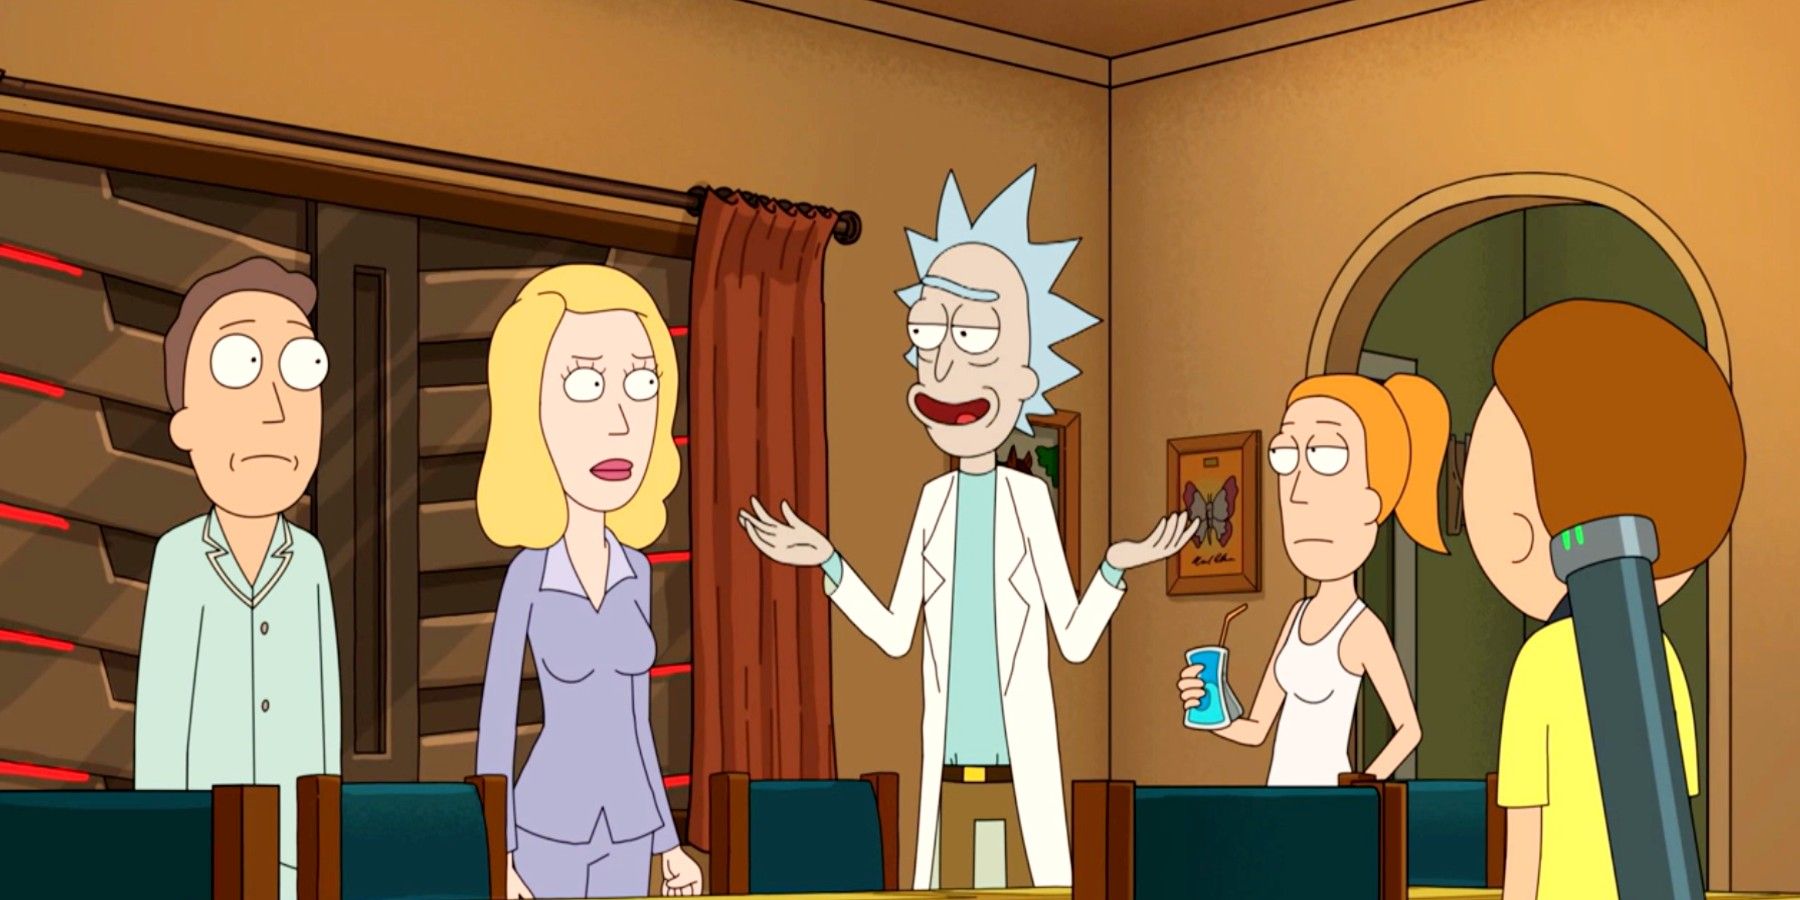 Rick and Morty with Beth, Jerry and Summer in their house